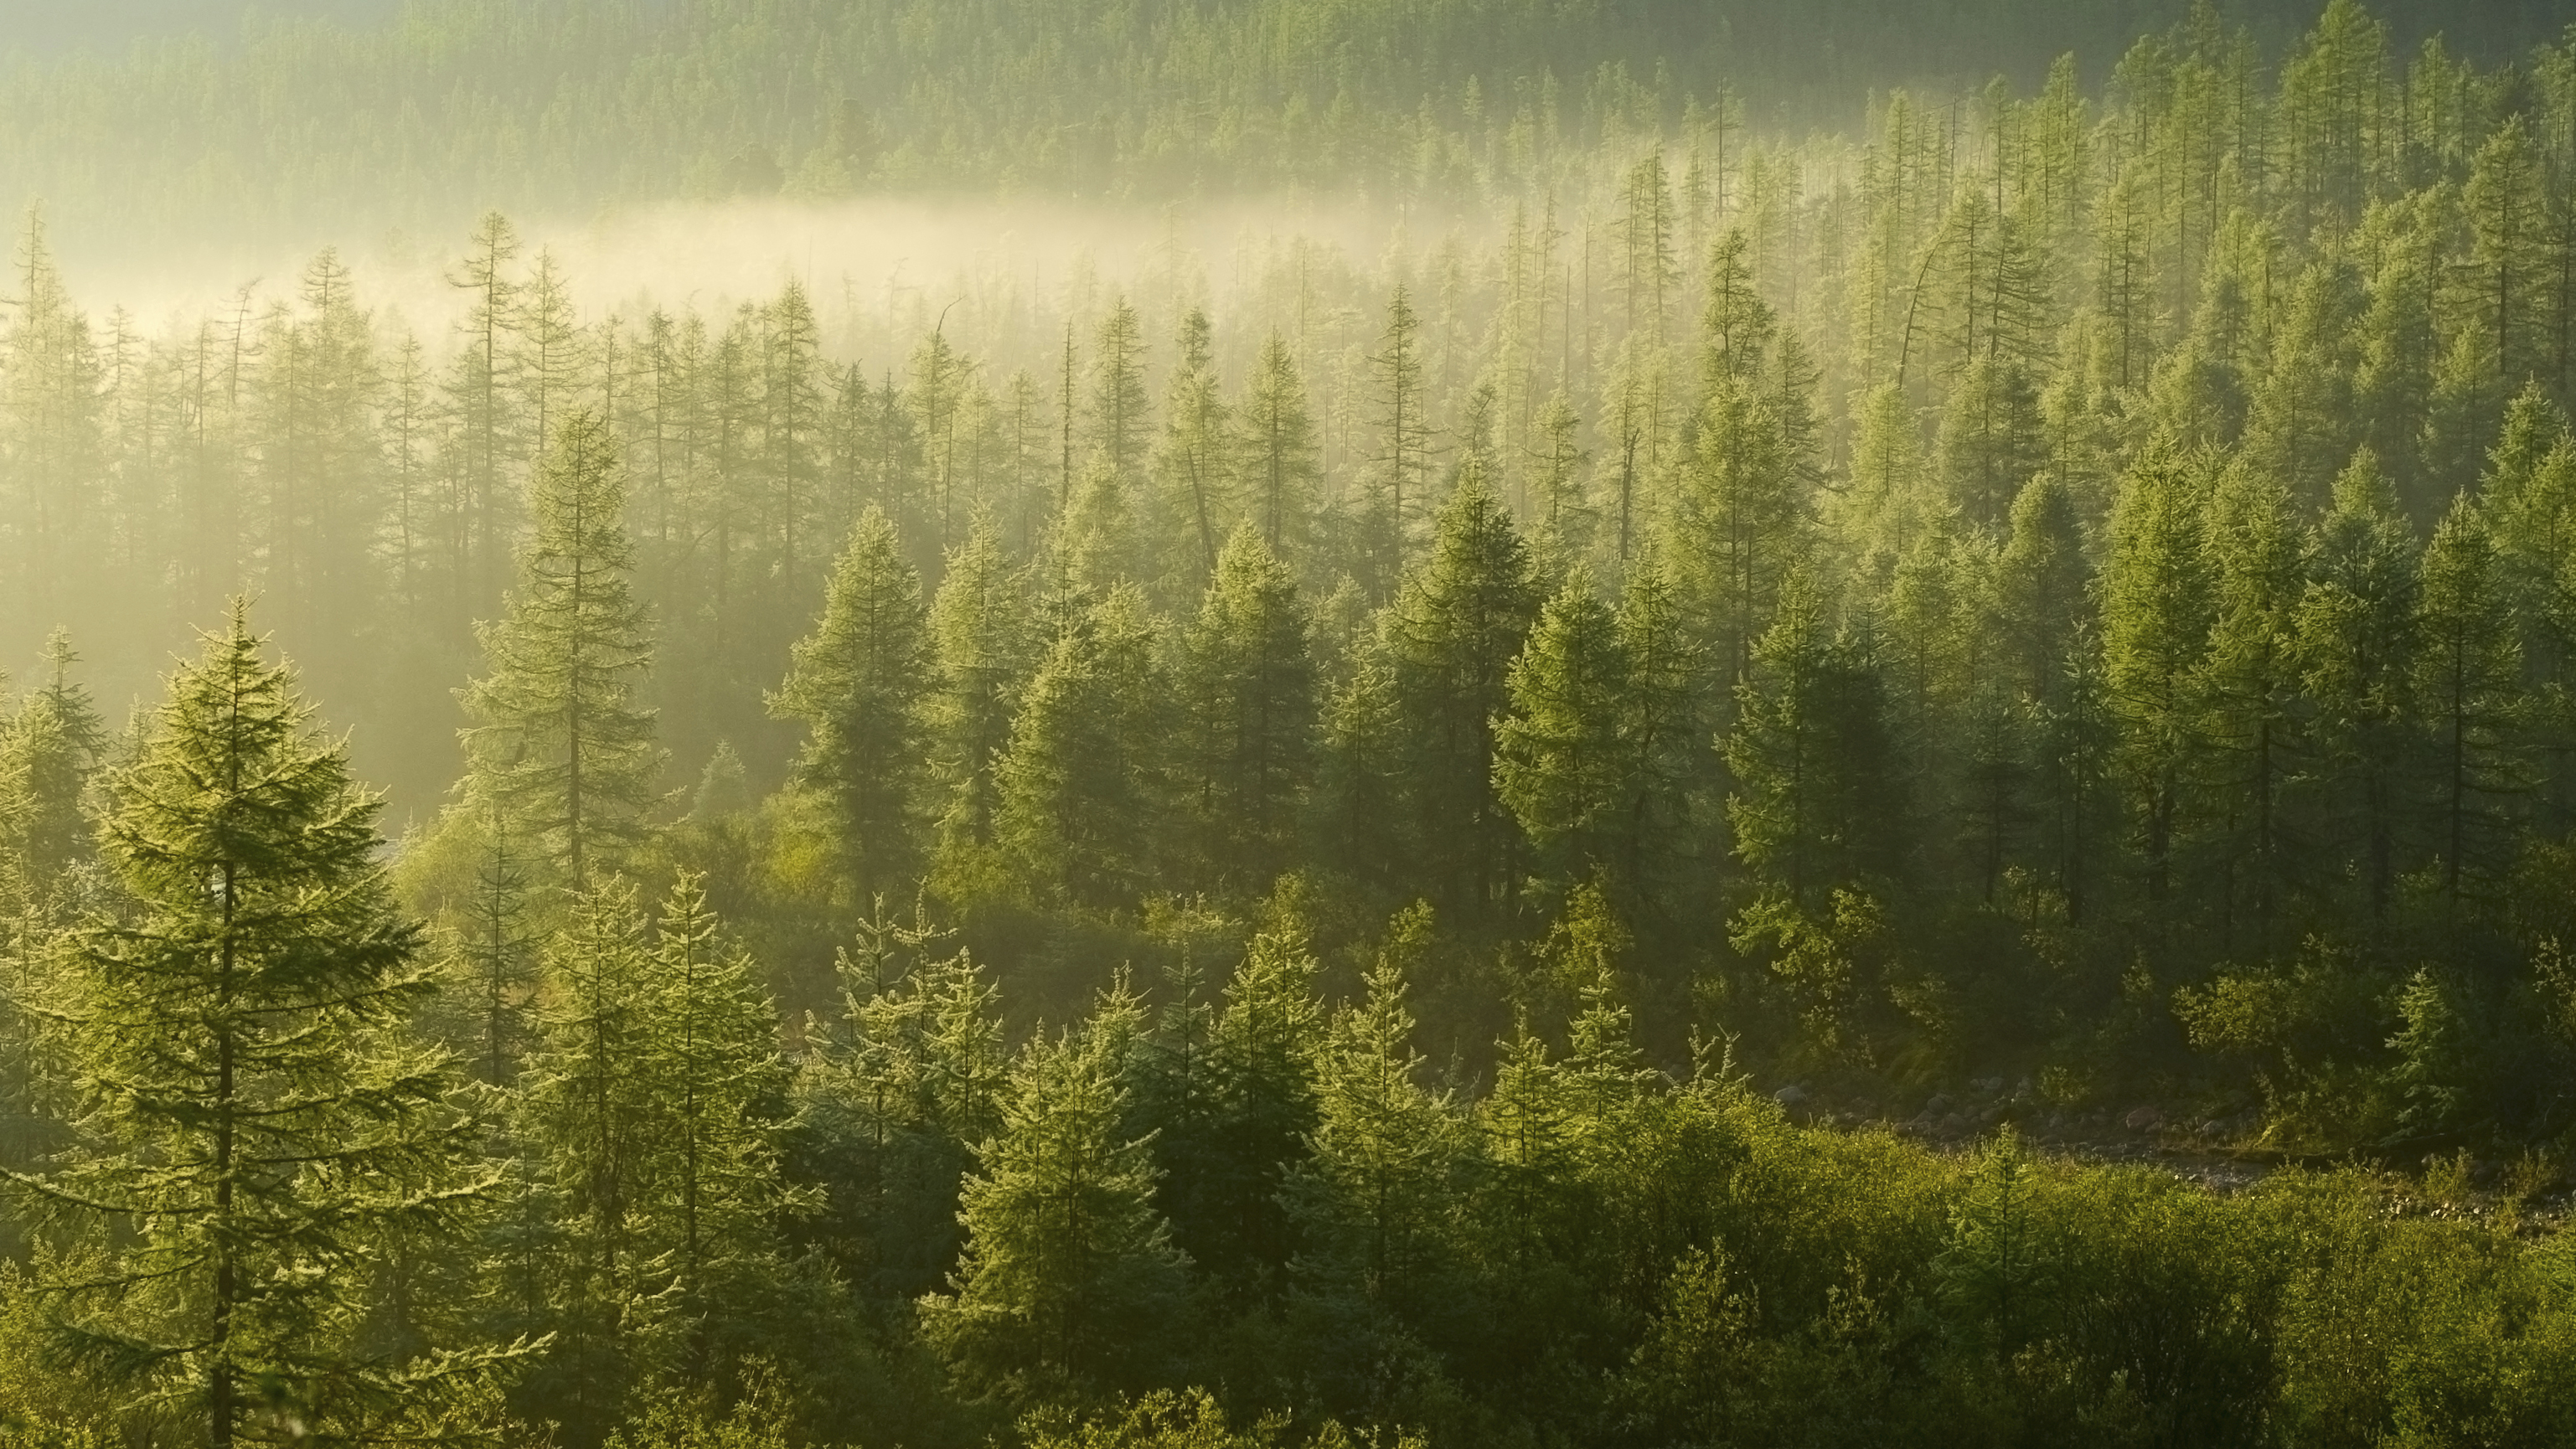 Forests | Resources for the Future